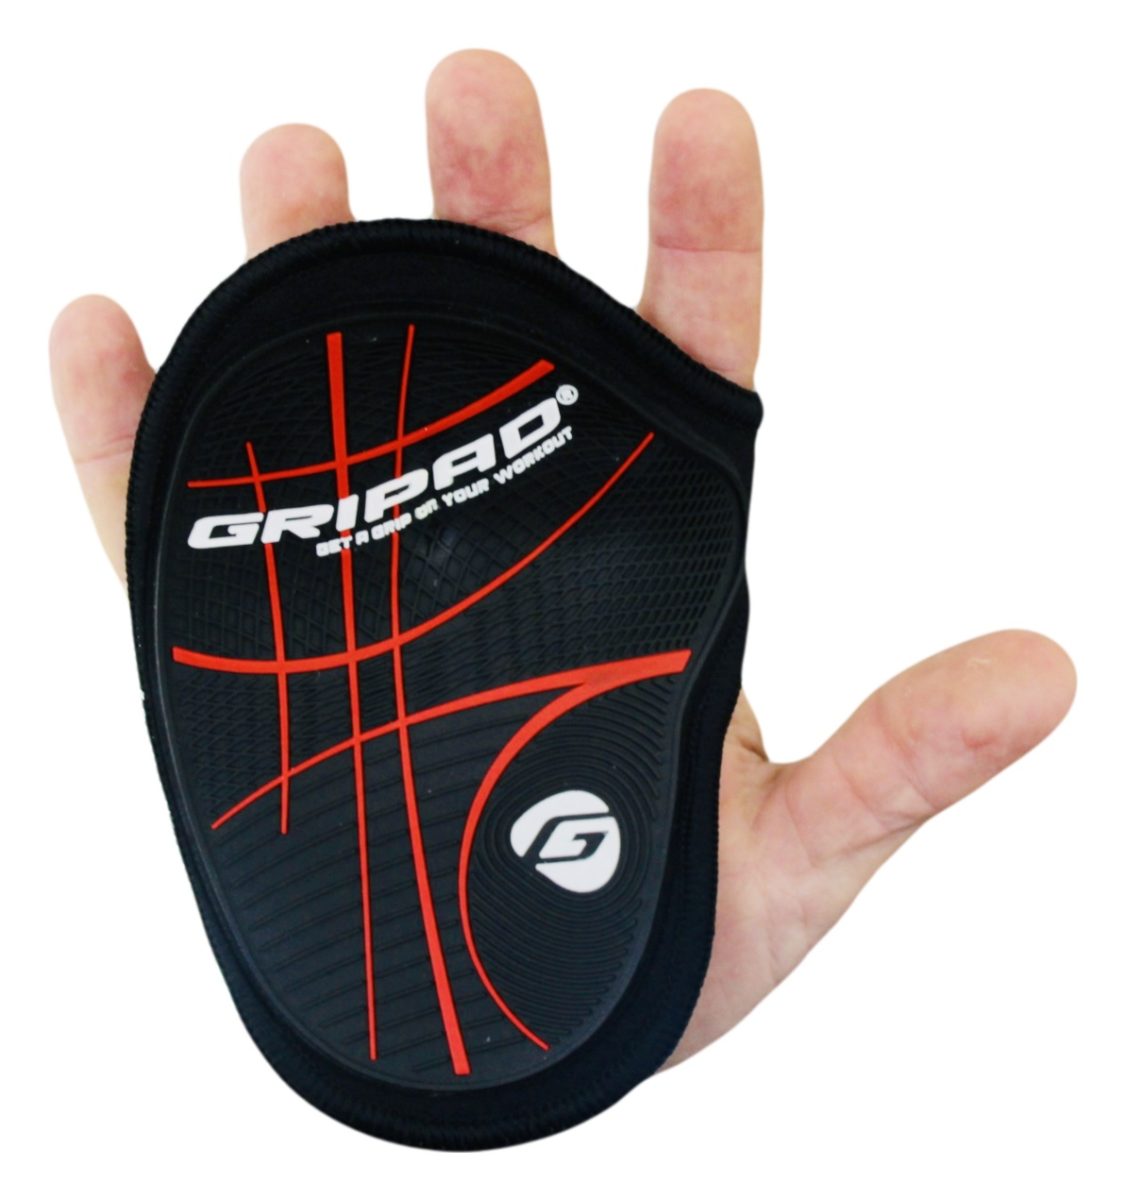 Gripad Classic Weight Lifting Crossfit Grip Gloves Pad Red 